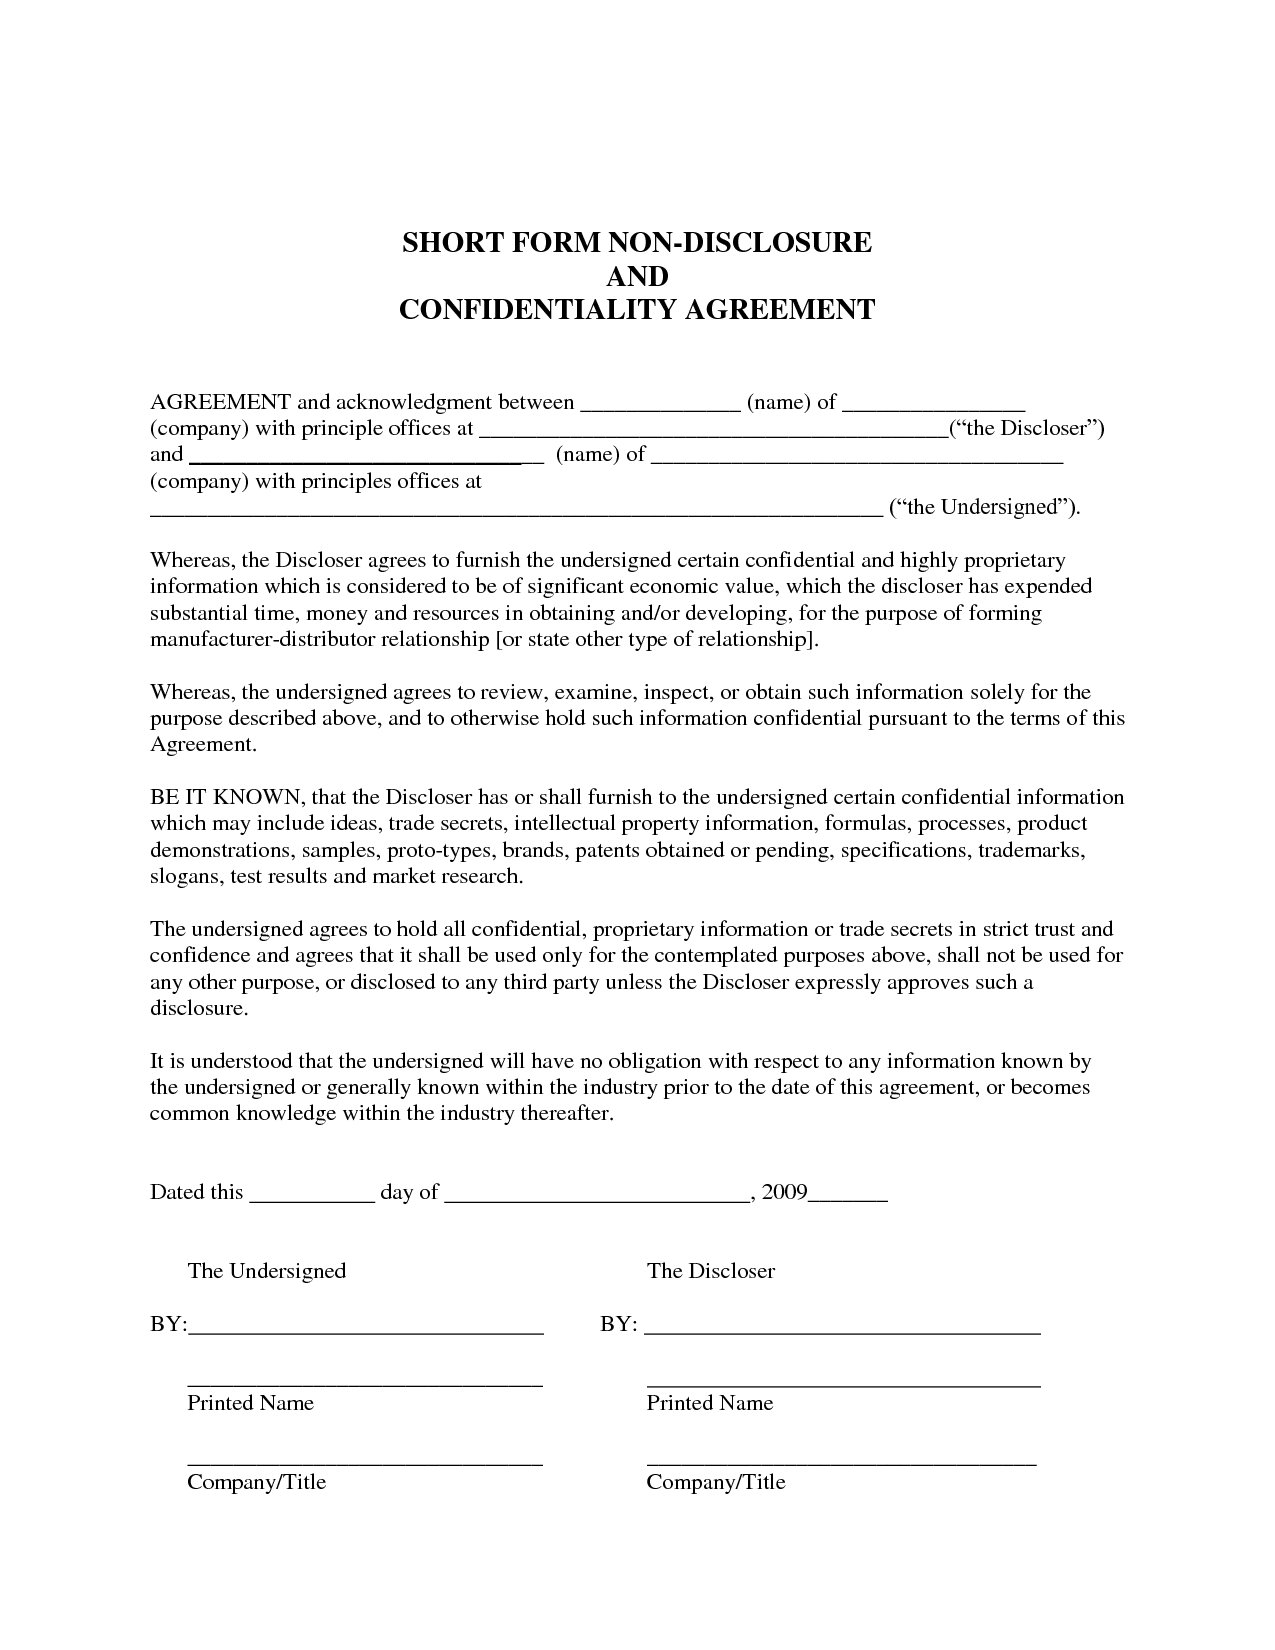 Sample Non-Disclosure Agreement | Confidentiality Agreement Sample - Free Printable Non Disclosure Agreement Form